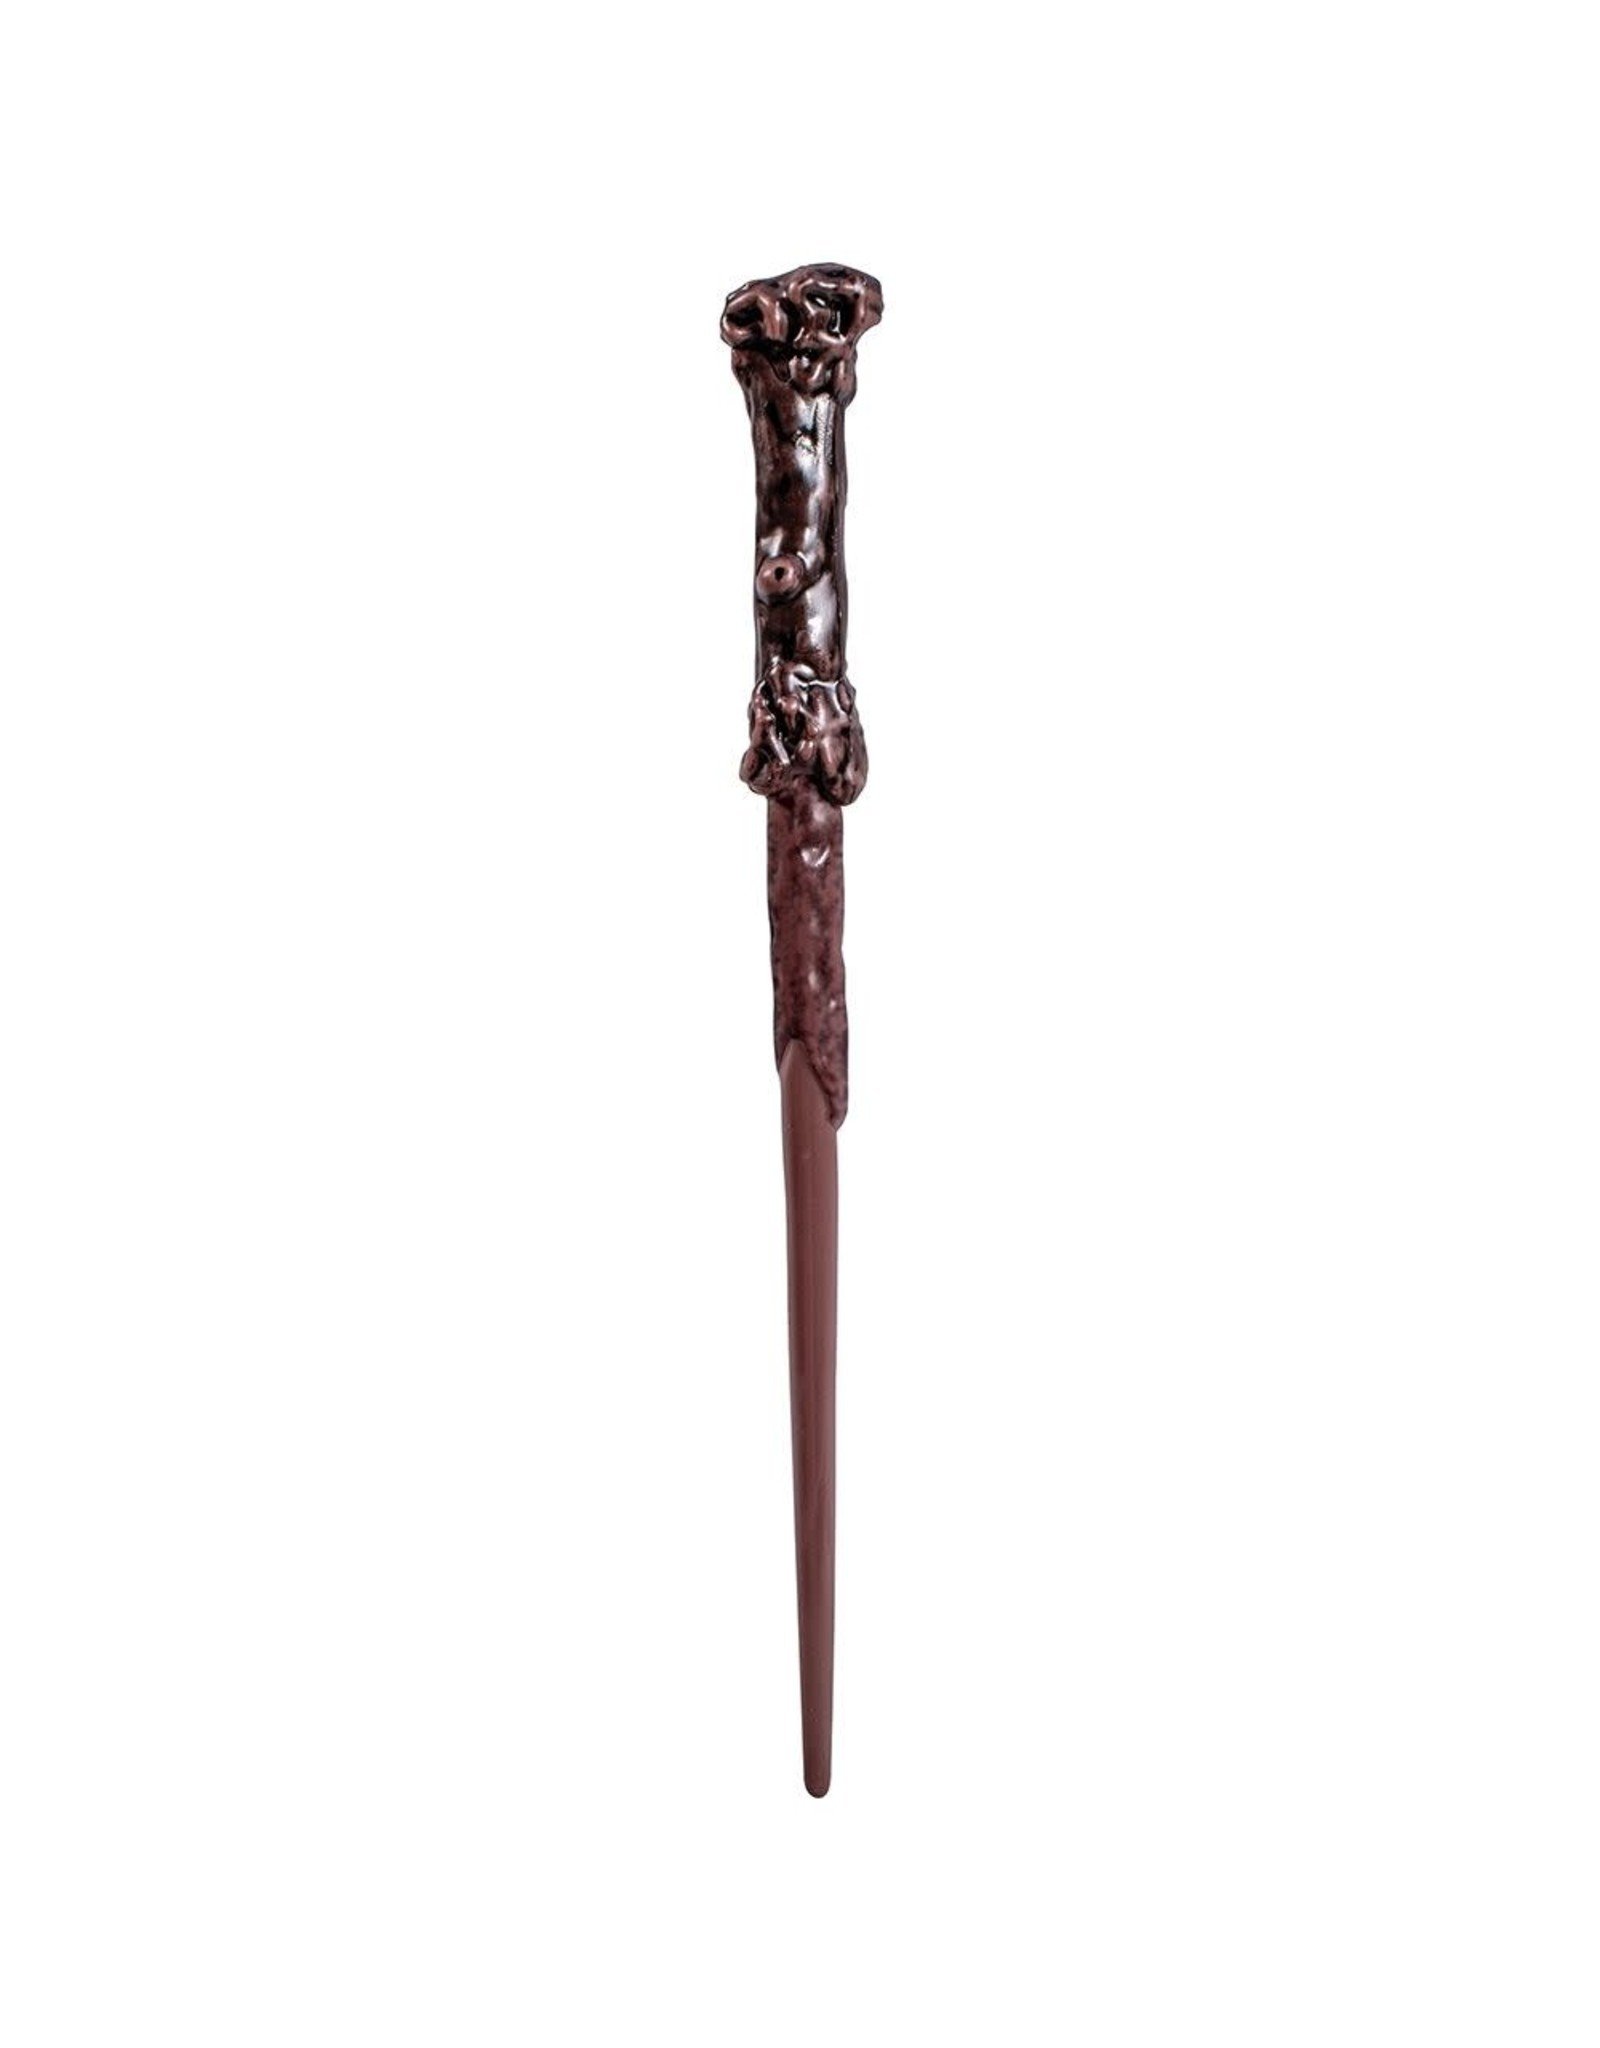 Disguise Harry Potter Wand